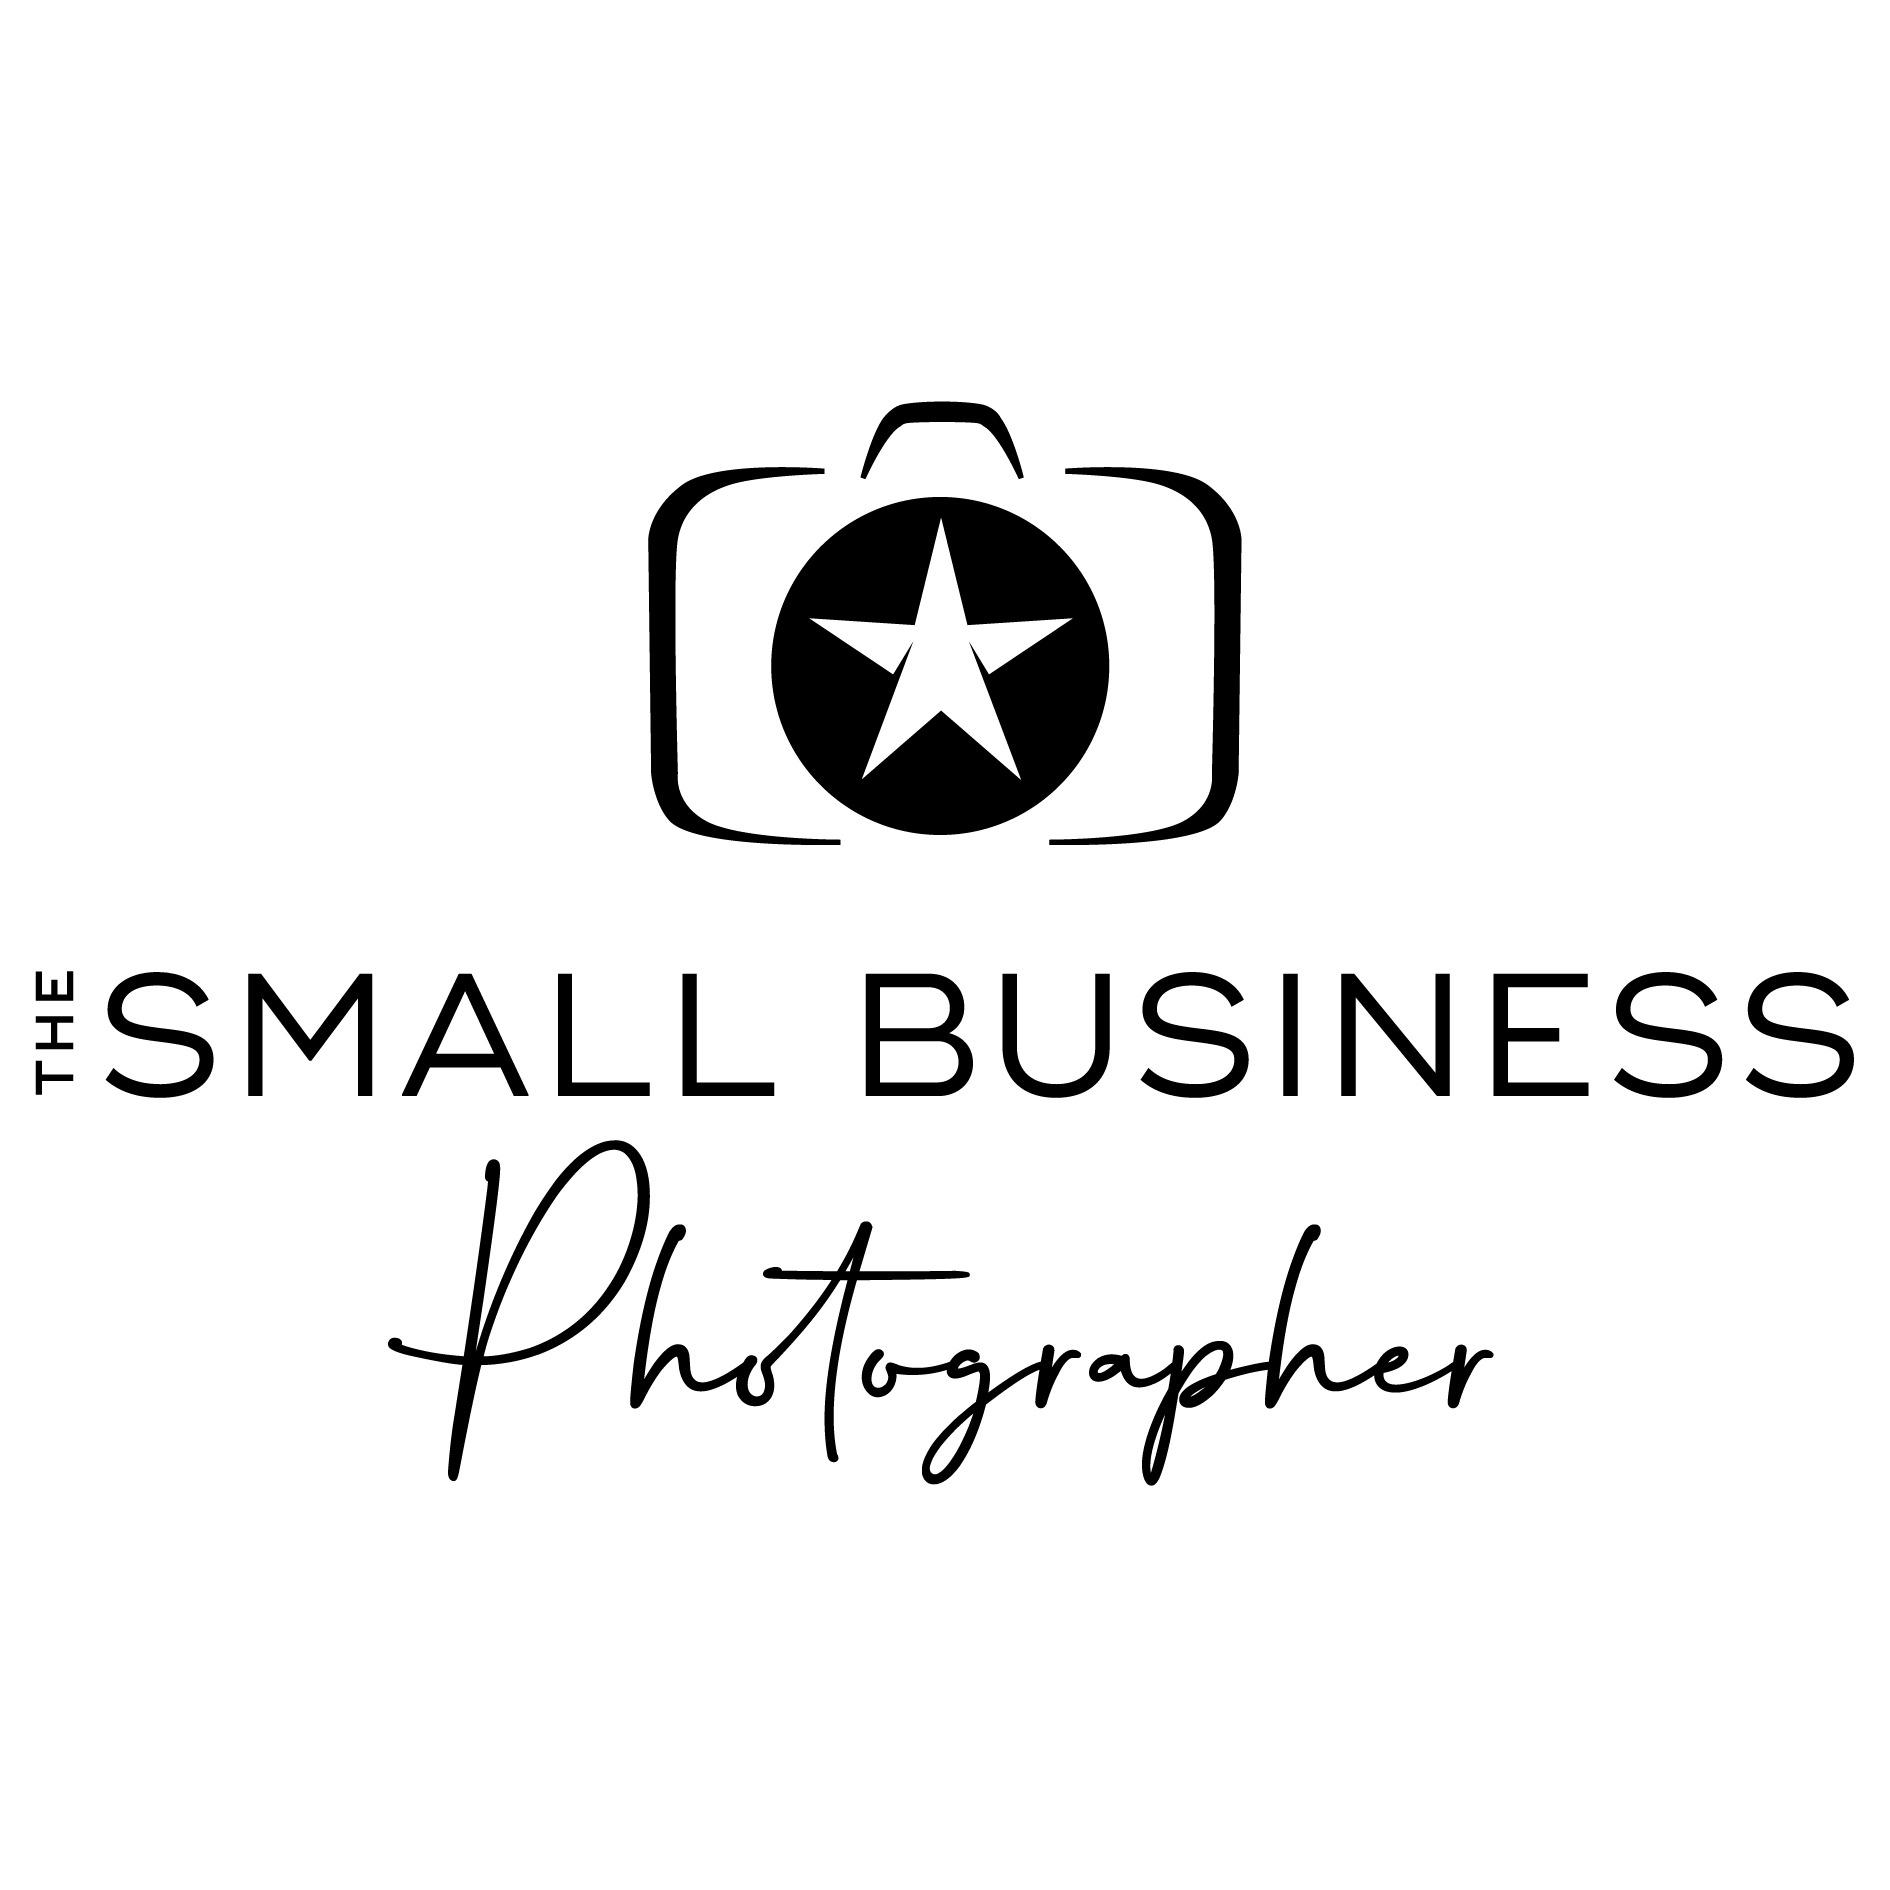 The Small Business Photographer